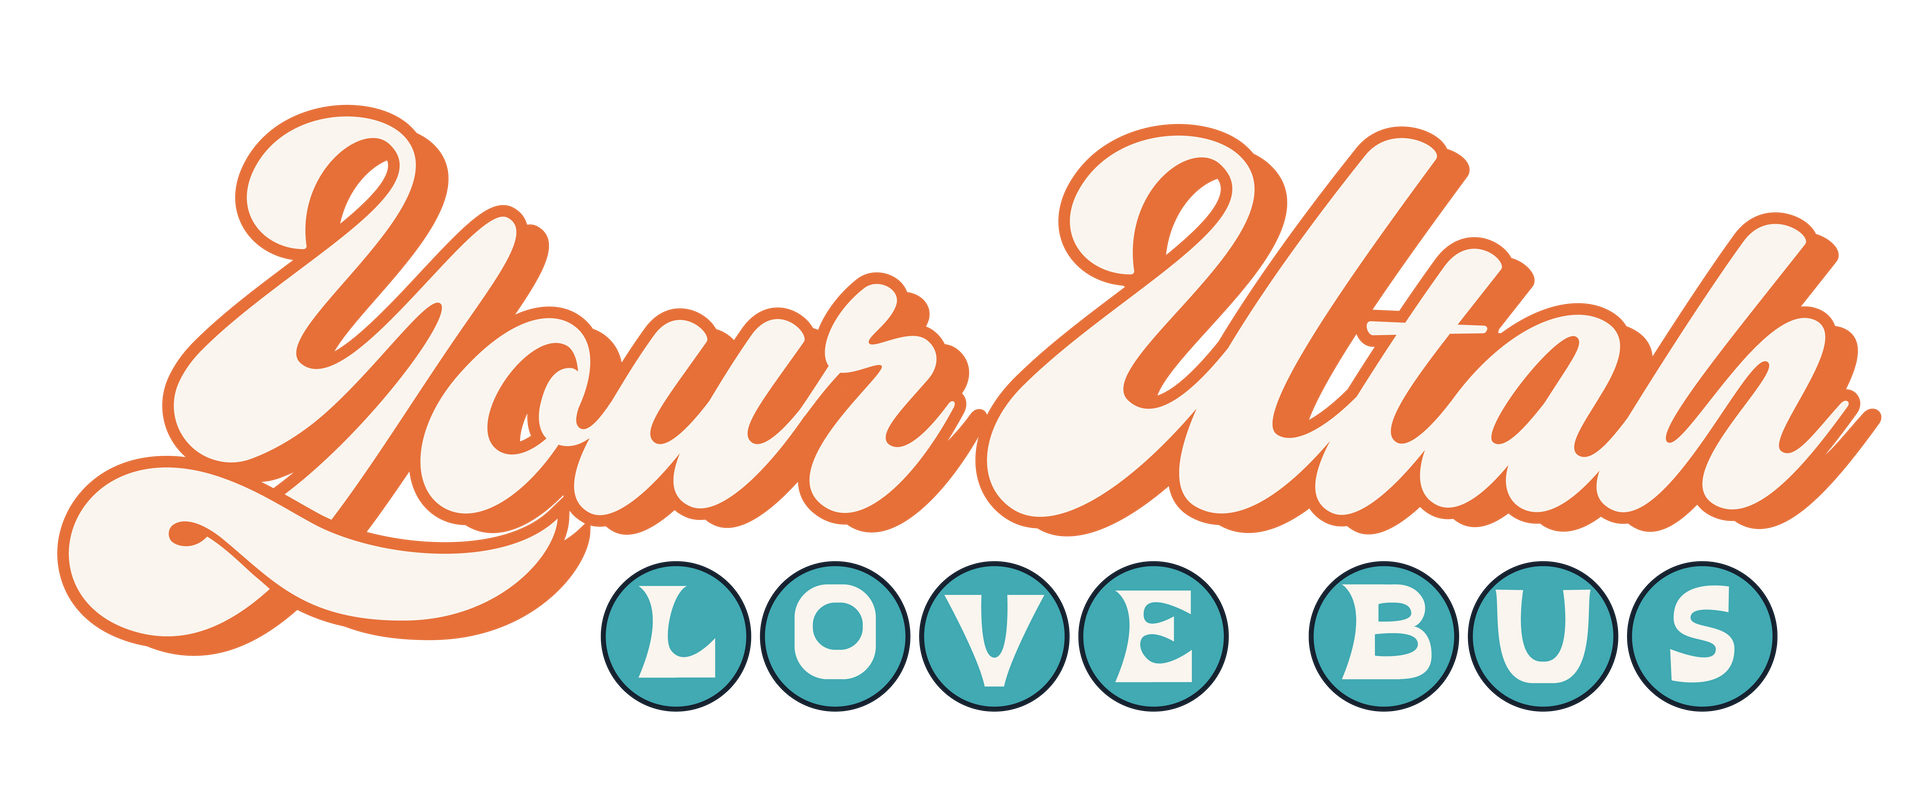 A logo for a company called your utah love bus